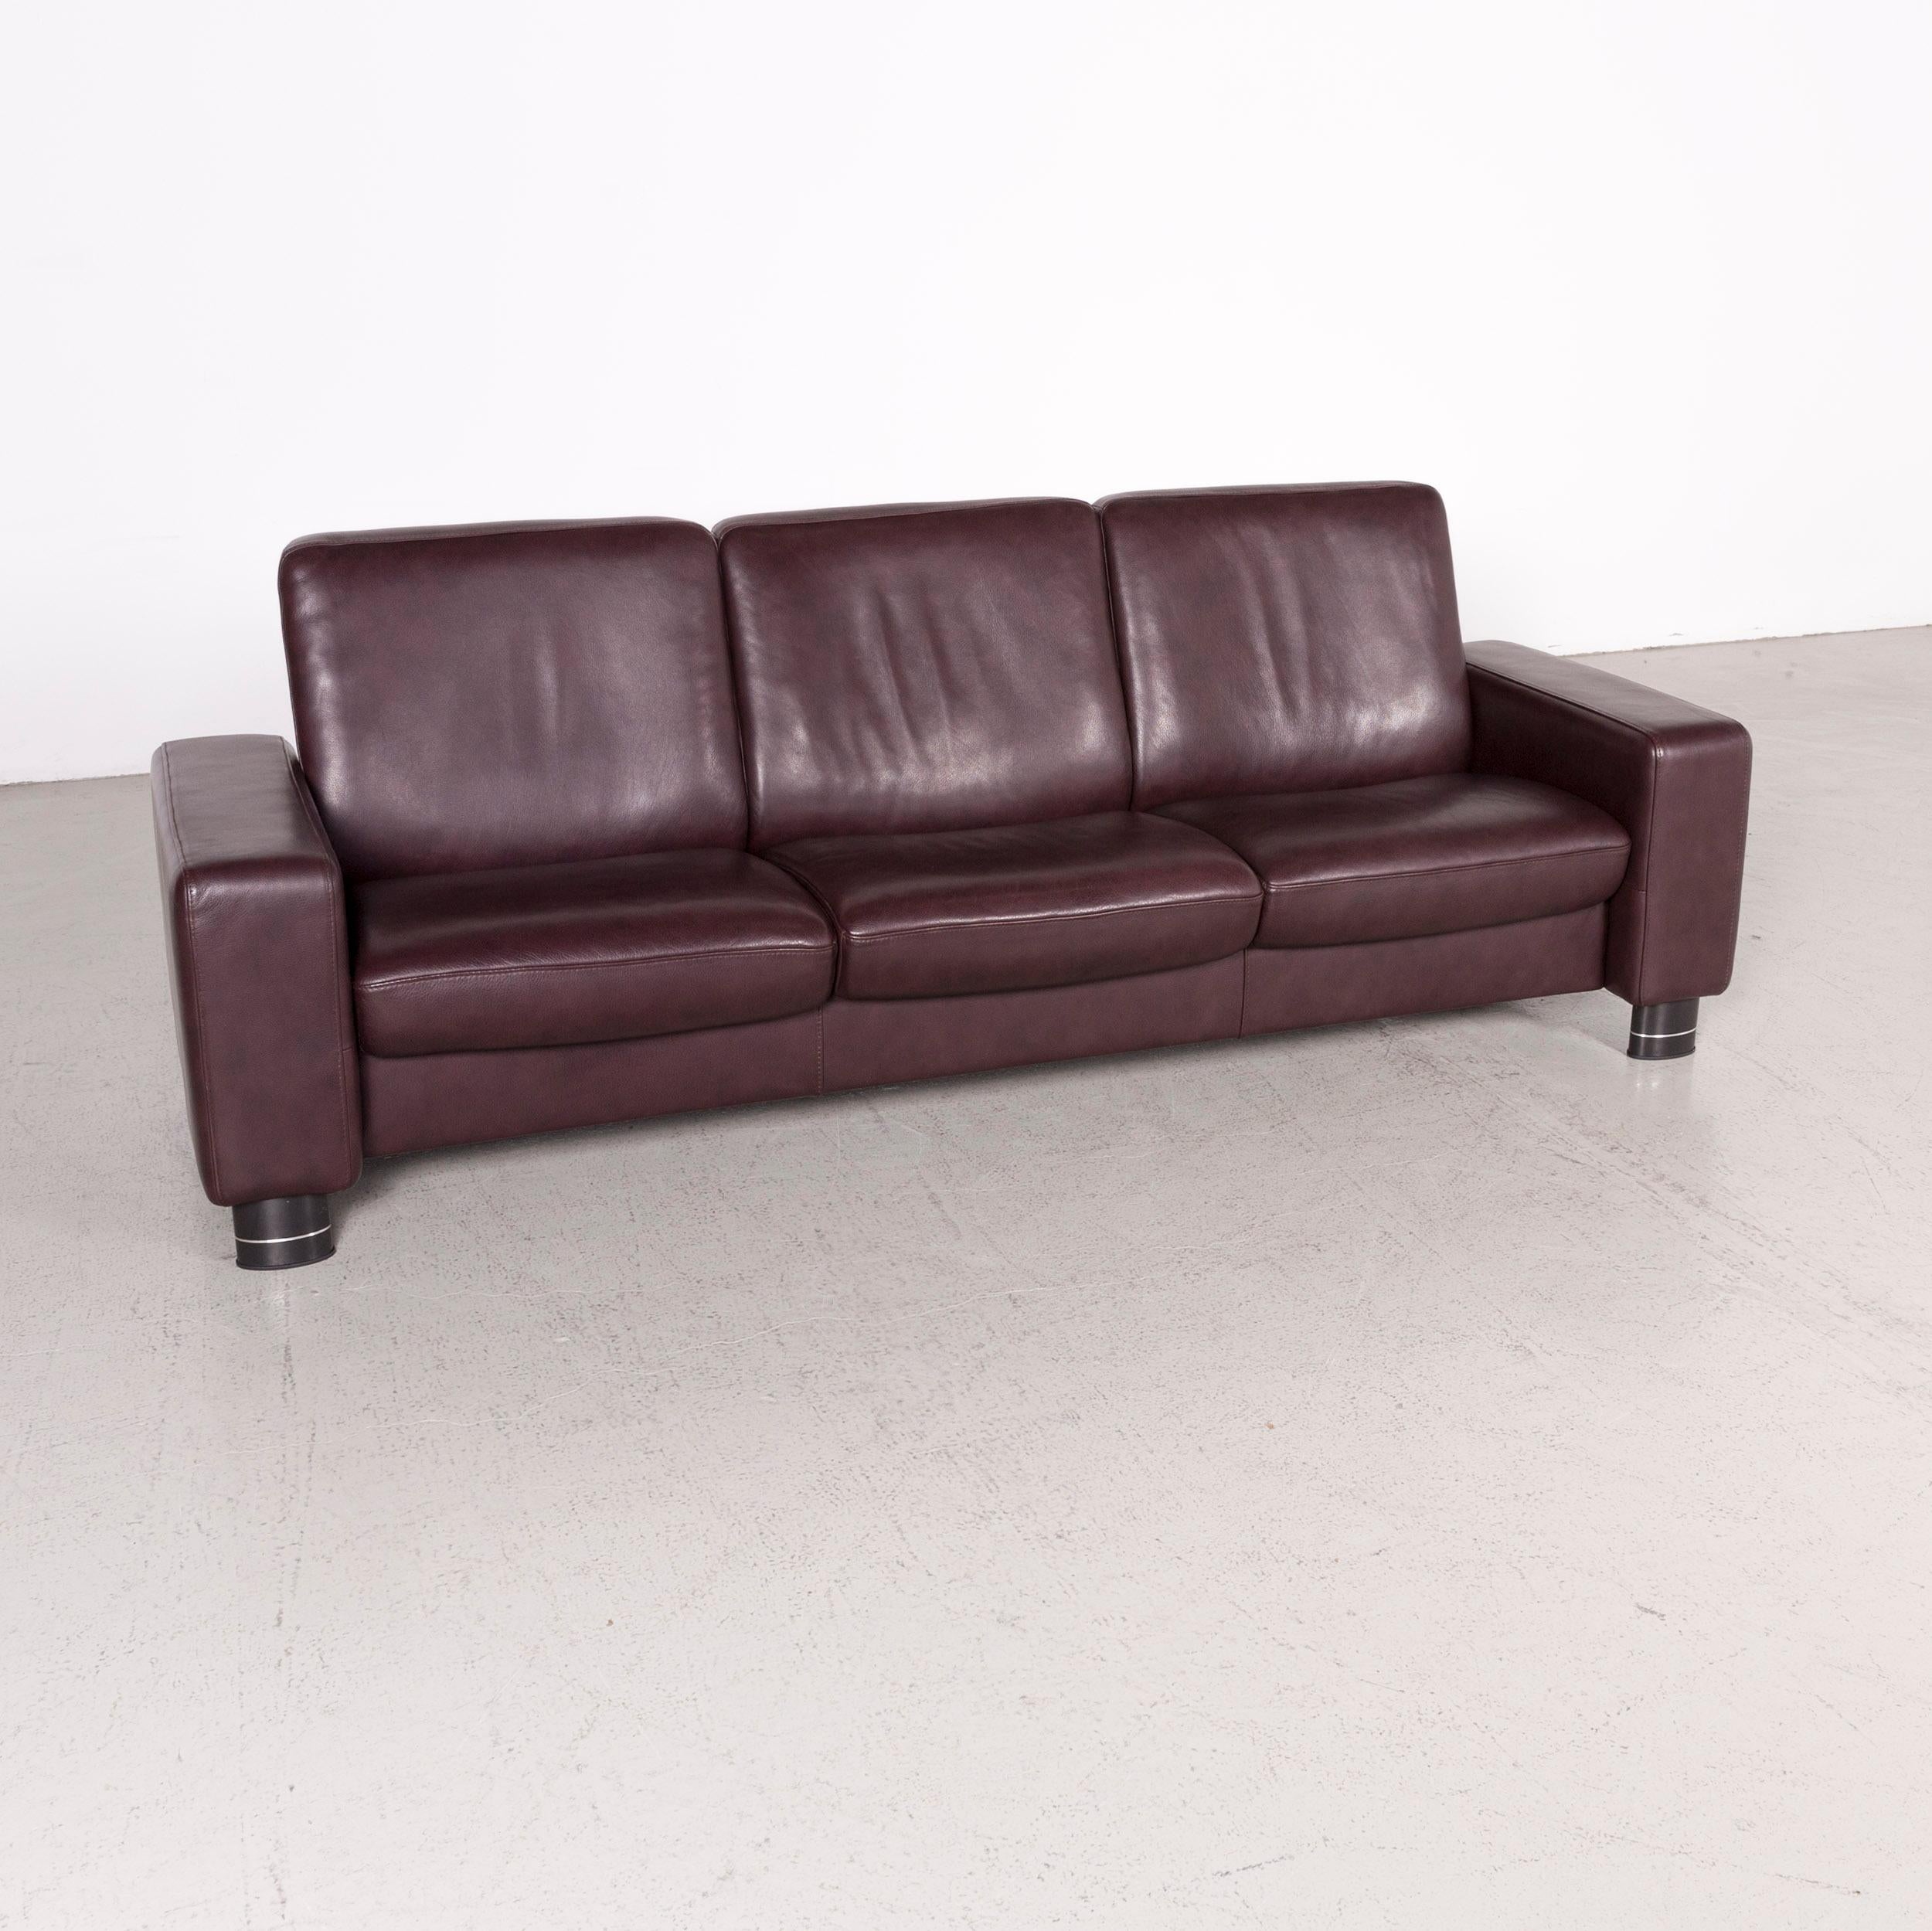 We bring to you a Stressless Jazz designer leather sofa eggplant three-sear real leather couch.
 

Product measures in centimeters:

Depth: 75
Width: 235
Height: 80
Seat-height: 45
Rest-height: 55
Seat-depth: 50
Seat-width: